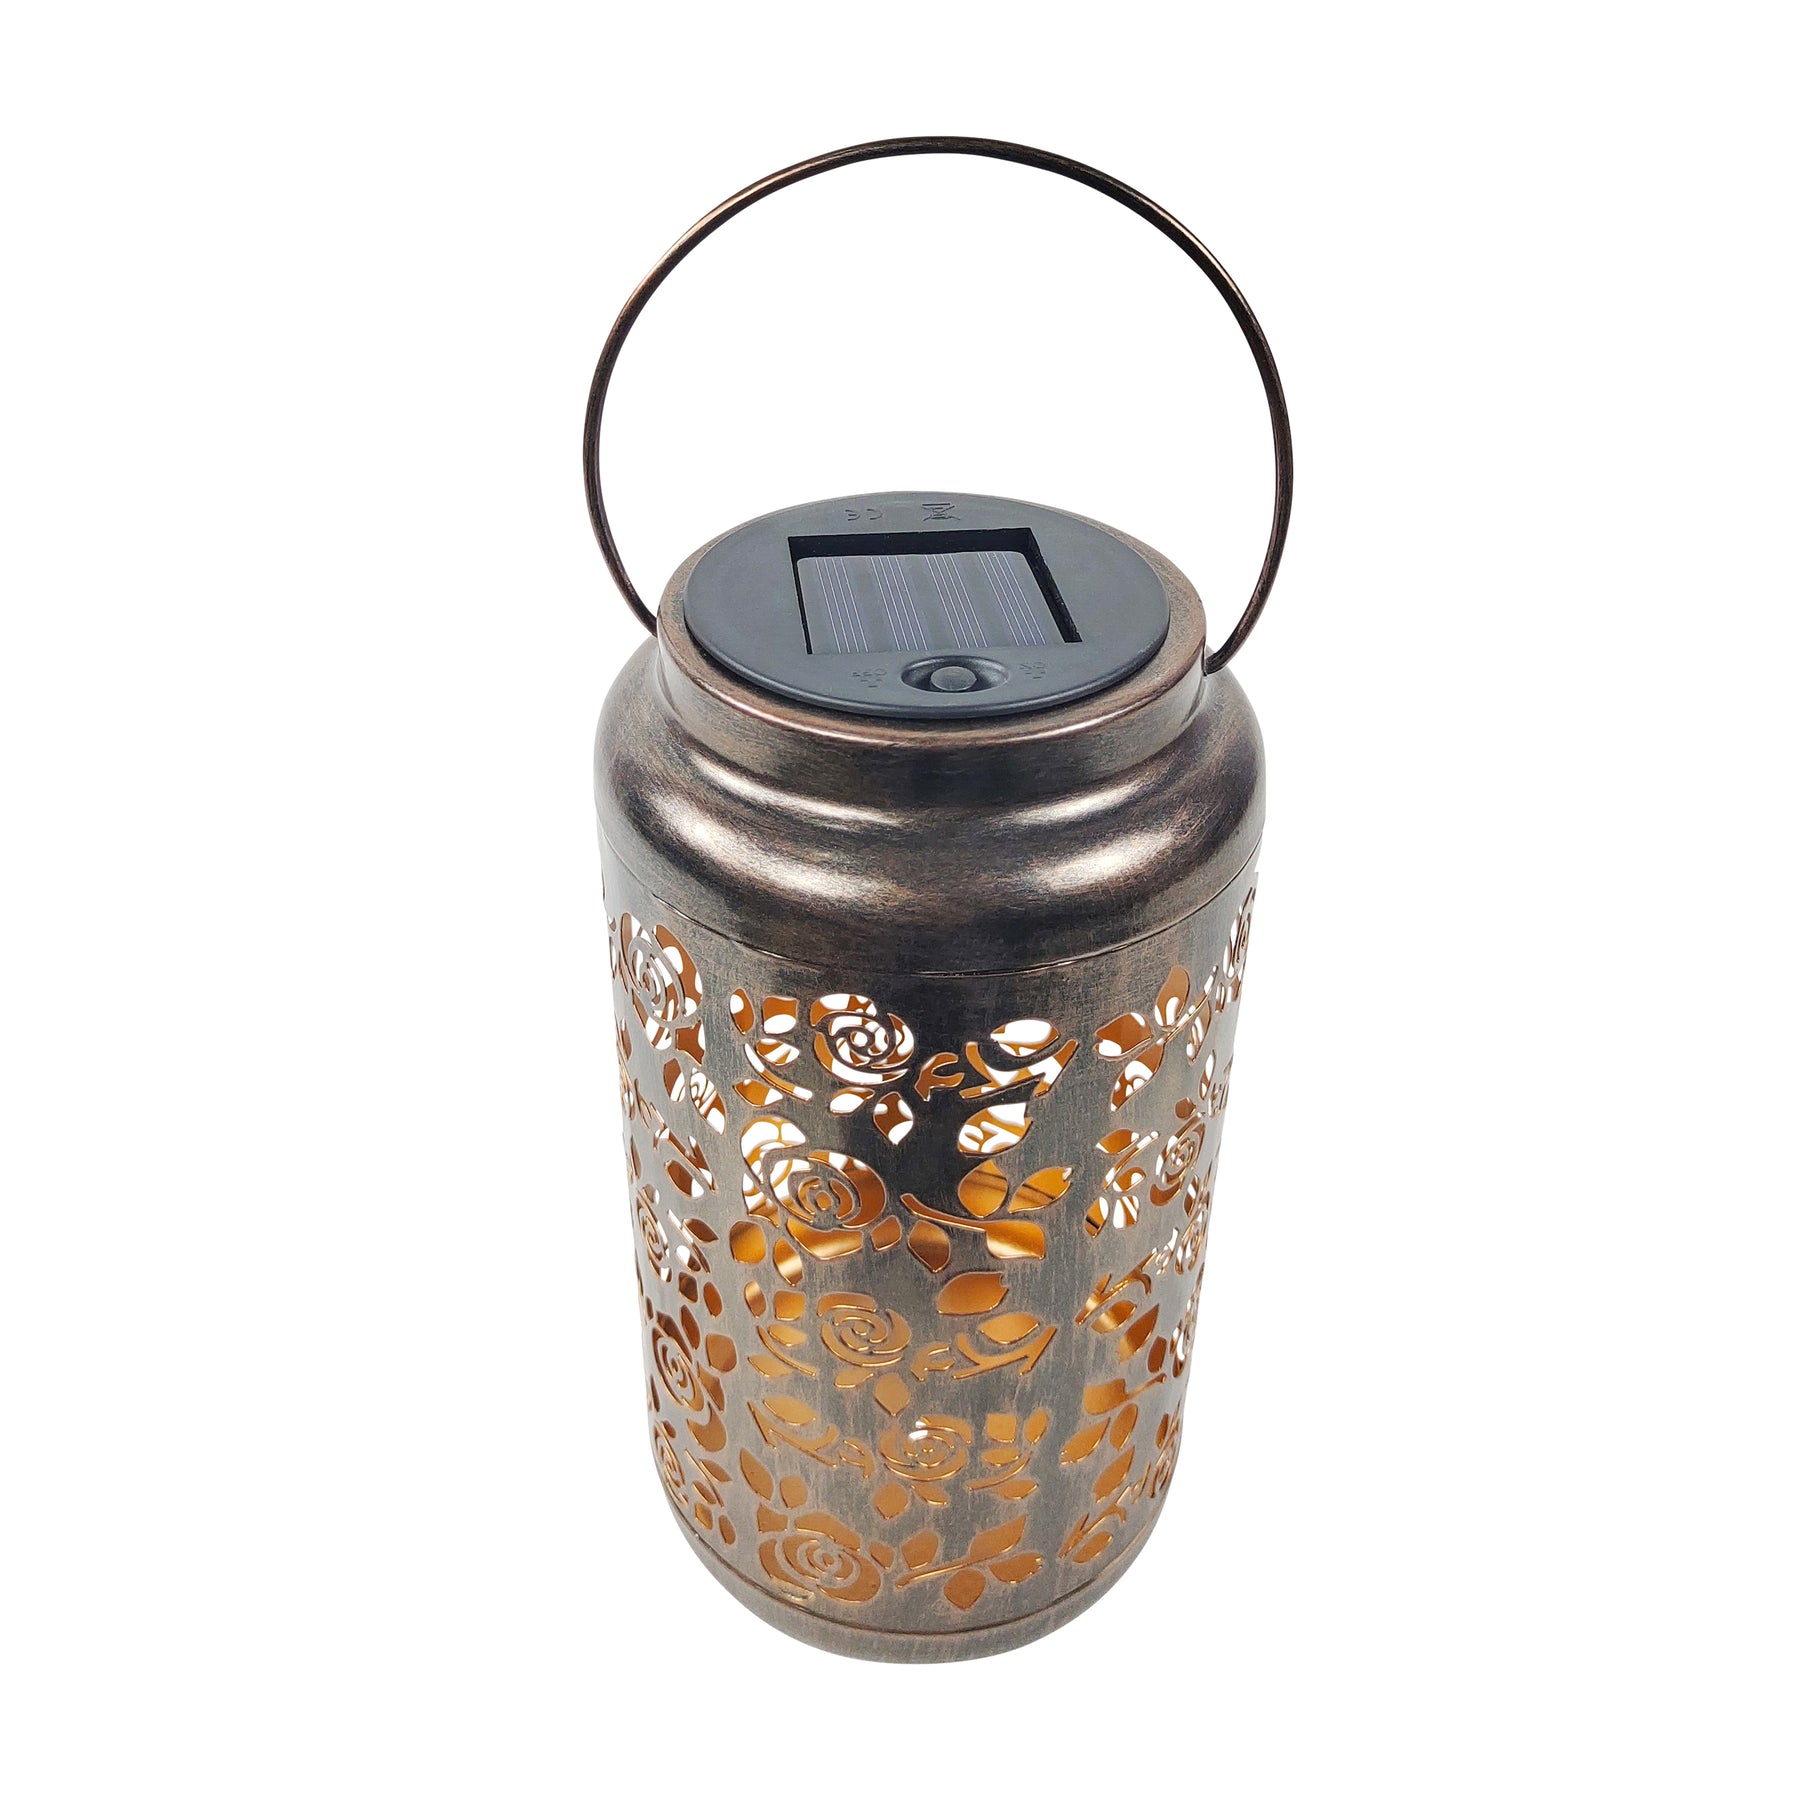 Top-angled view of a Bliss Outdoors 9-inch Tall Hanging and Tabletop Decorative Solar LED Lantern w/ Unique Rose Design and Antique Hand Painted Finish in the brushed bronze variation.